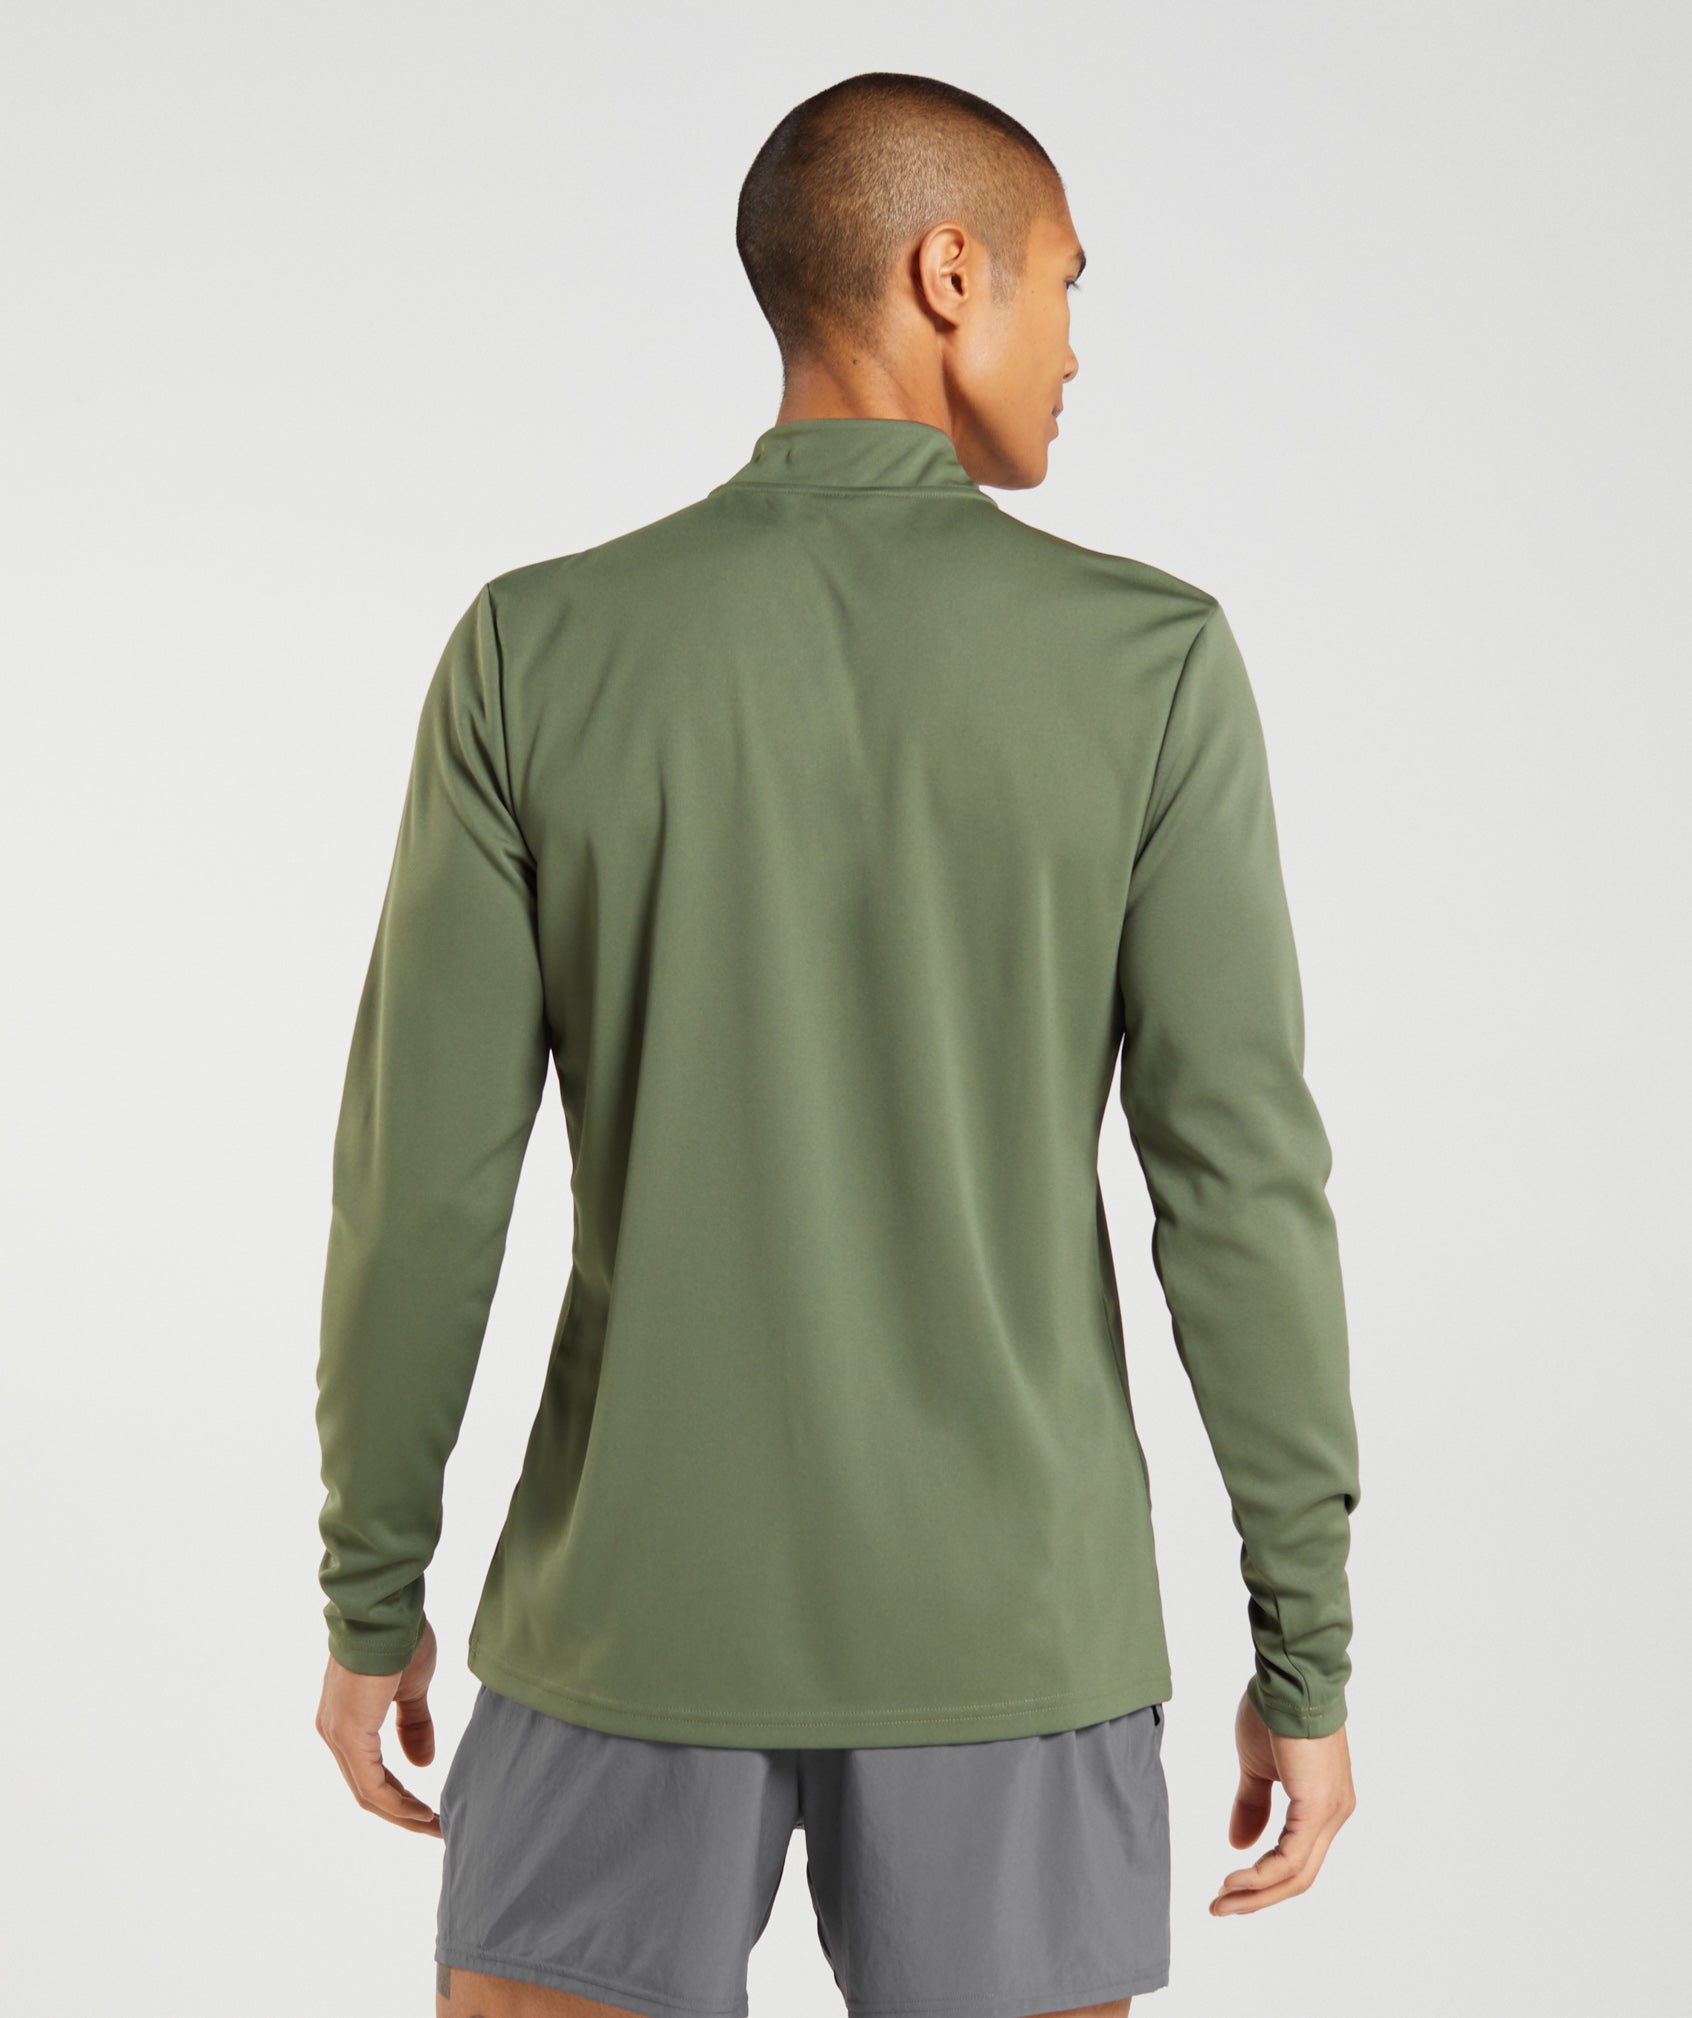 Arrival 1/4 Zip Pullover in Core Olive